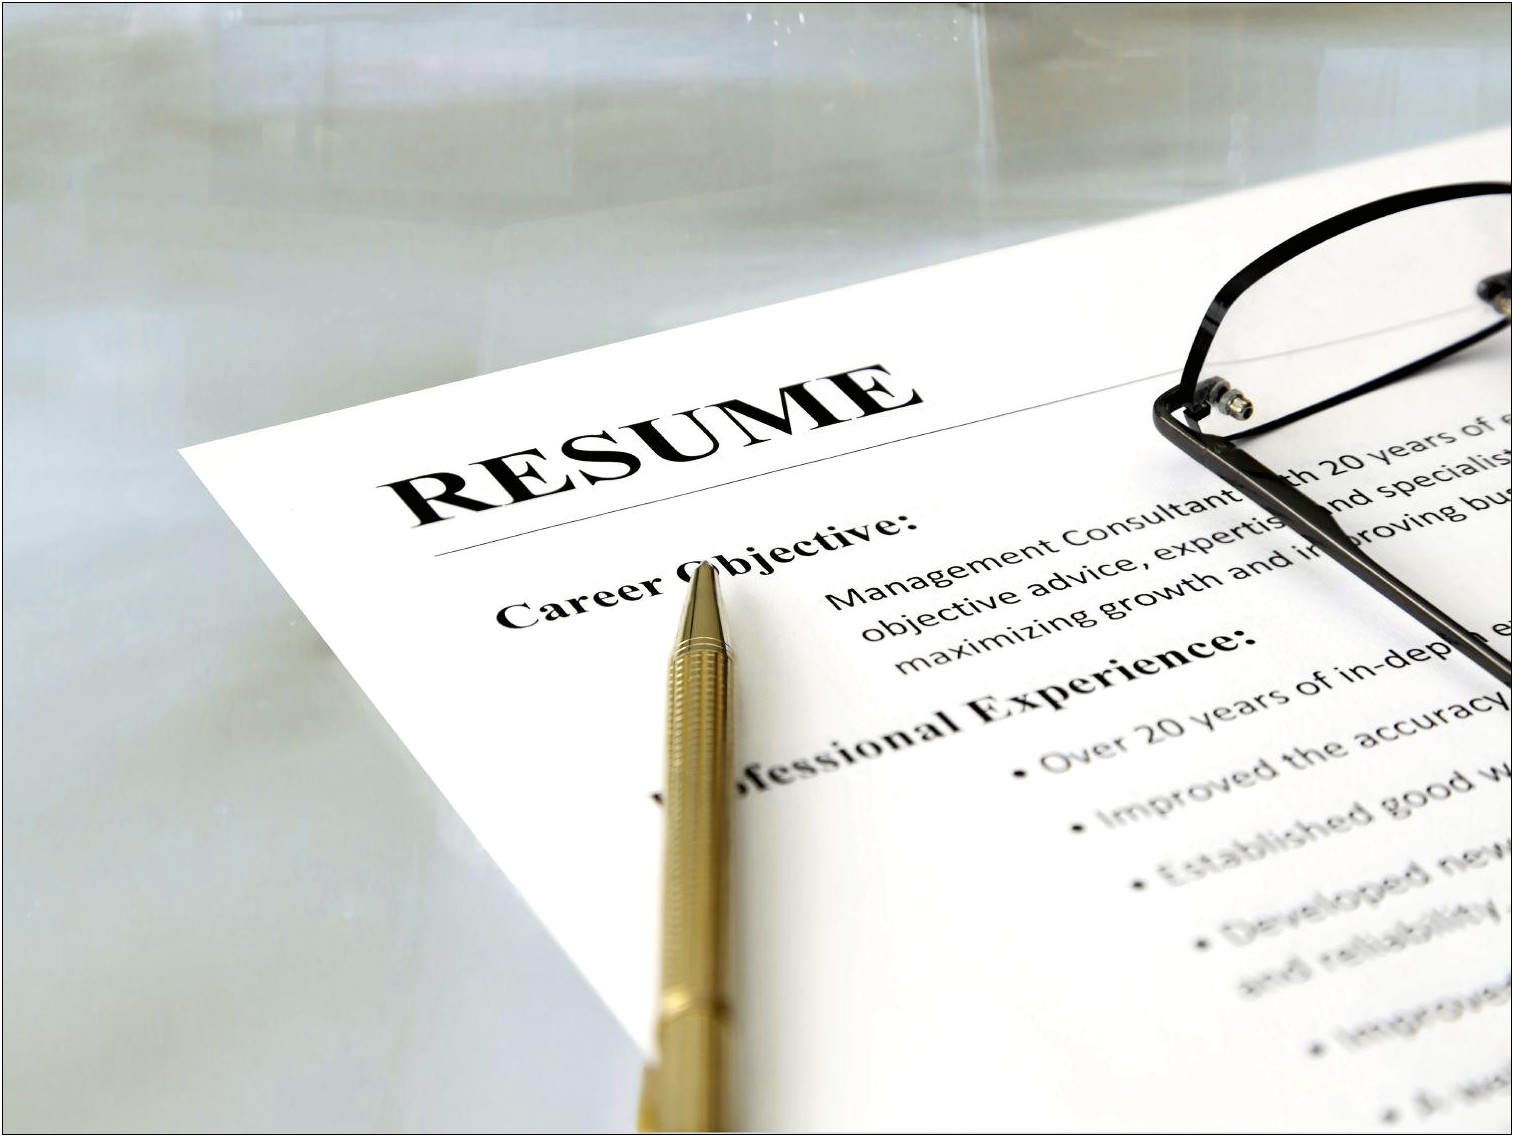 Examples For Career Objective In Resume